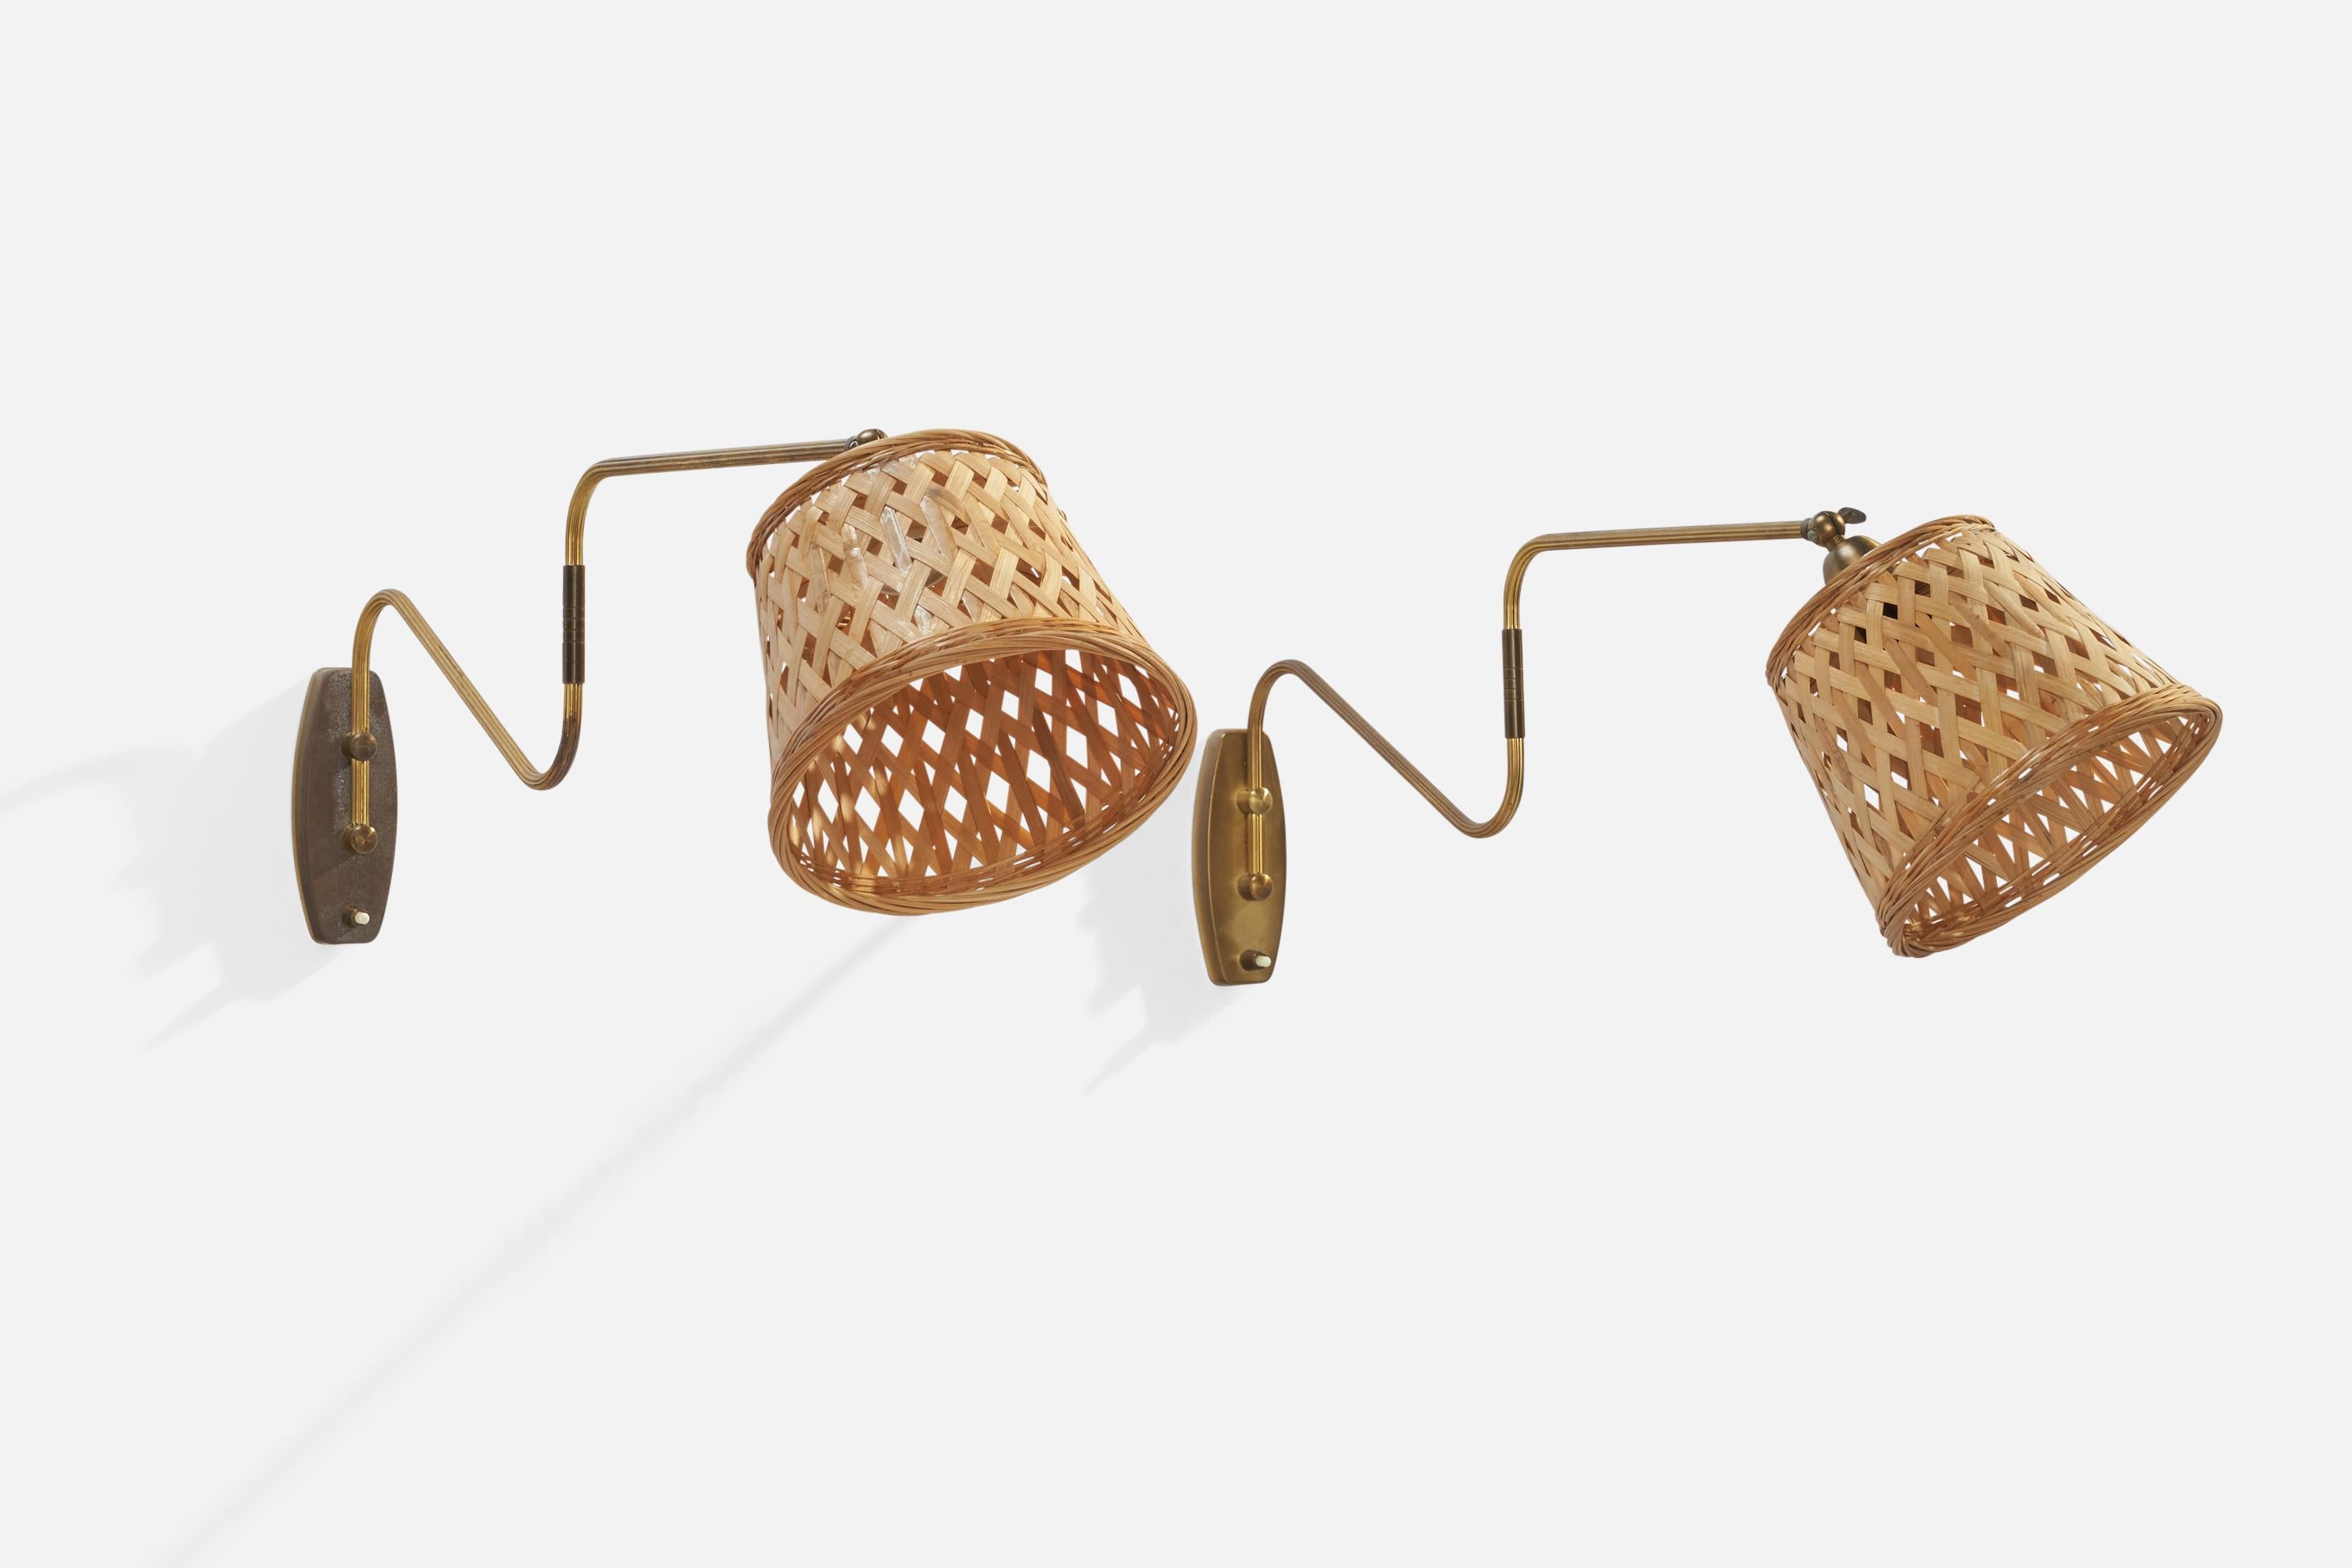 A pair of brass and rattan wall lights designed and produced in Denmark, 1940s.

Overall Dimensions (inches): 9.5” H x 12” W x 24” D
Back Plate Dimensions (inches): 5.75”  H x 2.25” W x .75”  D
Bulb Specifications: E-26 Bulb
Number of Sockets: 2
All